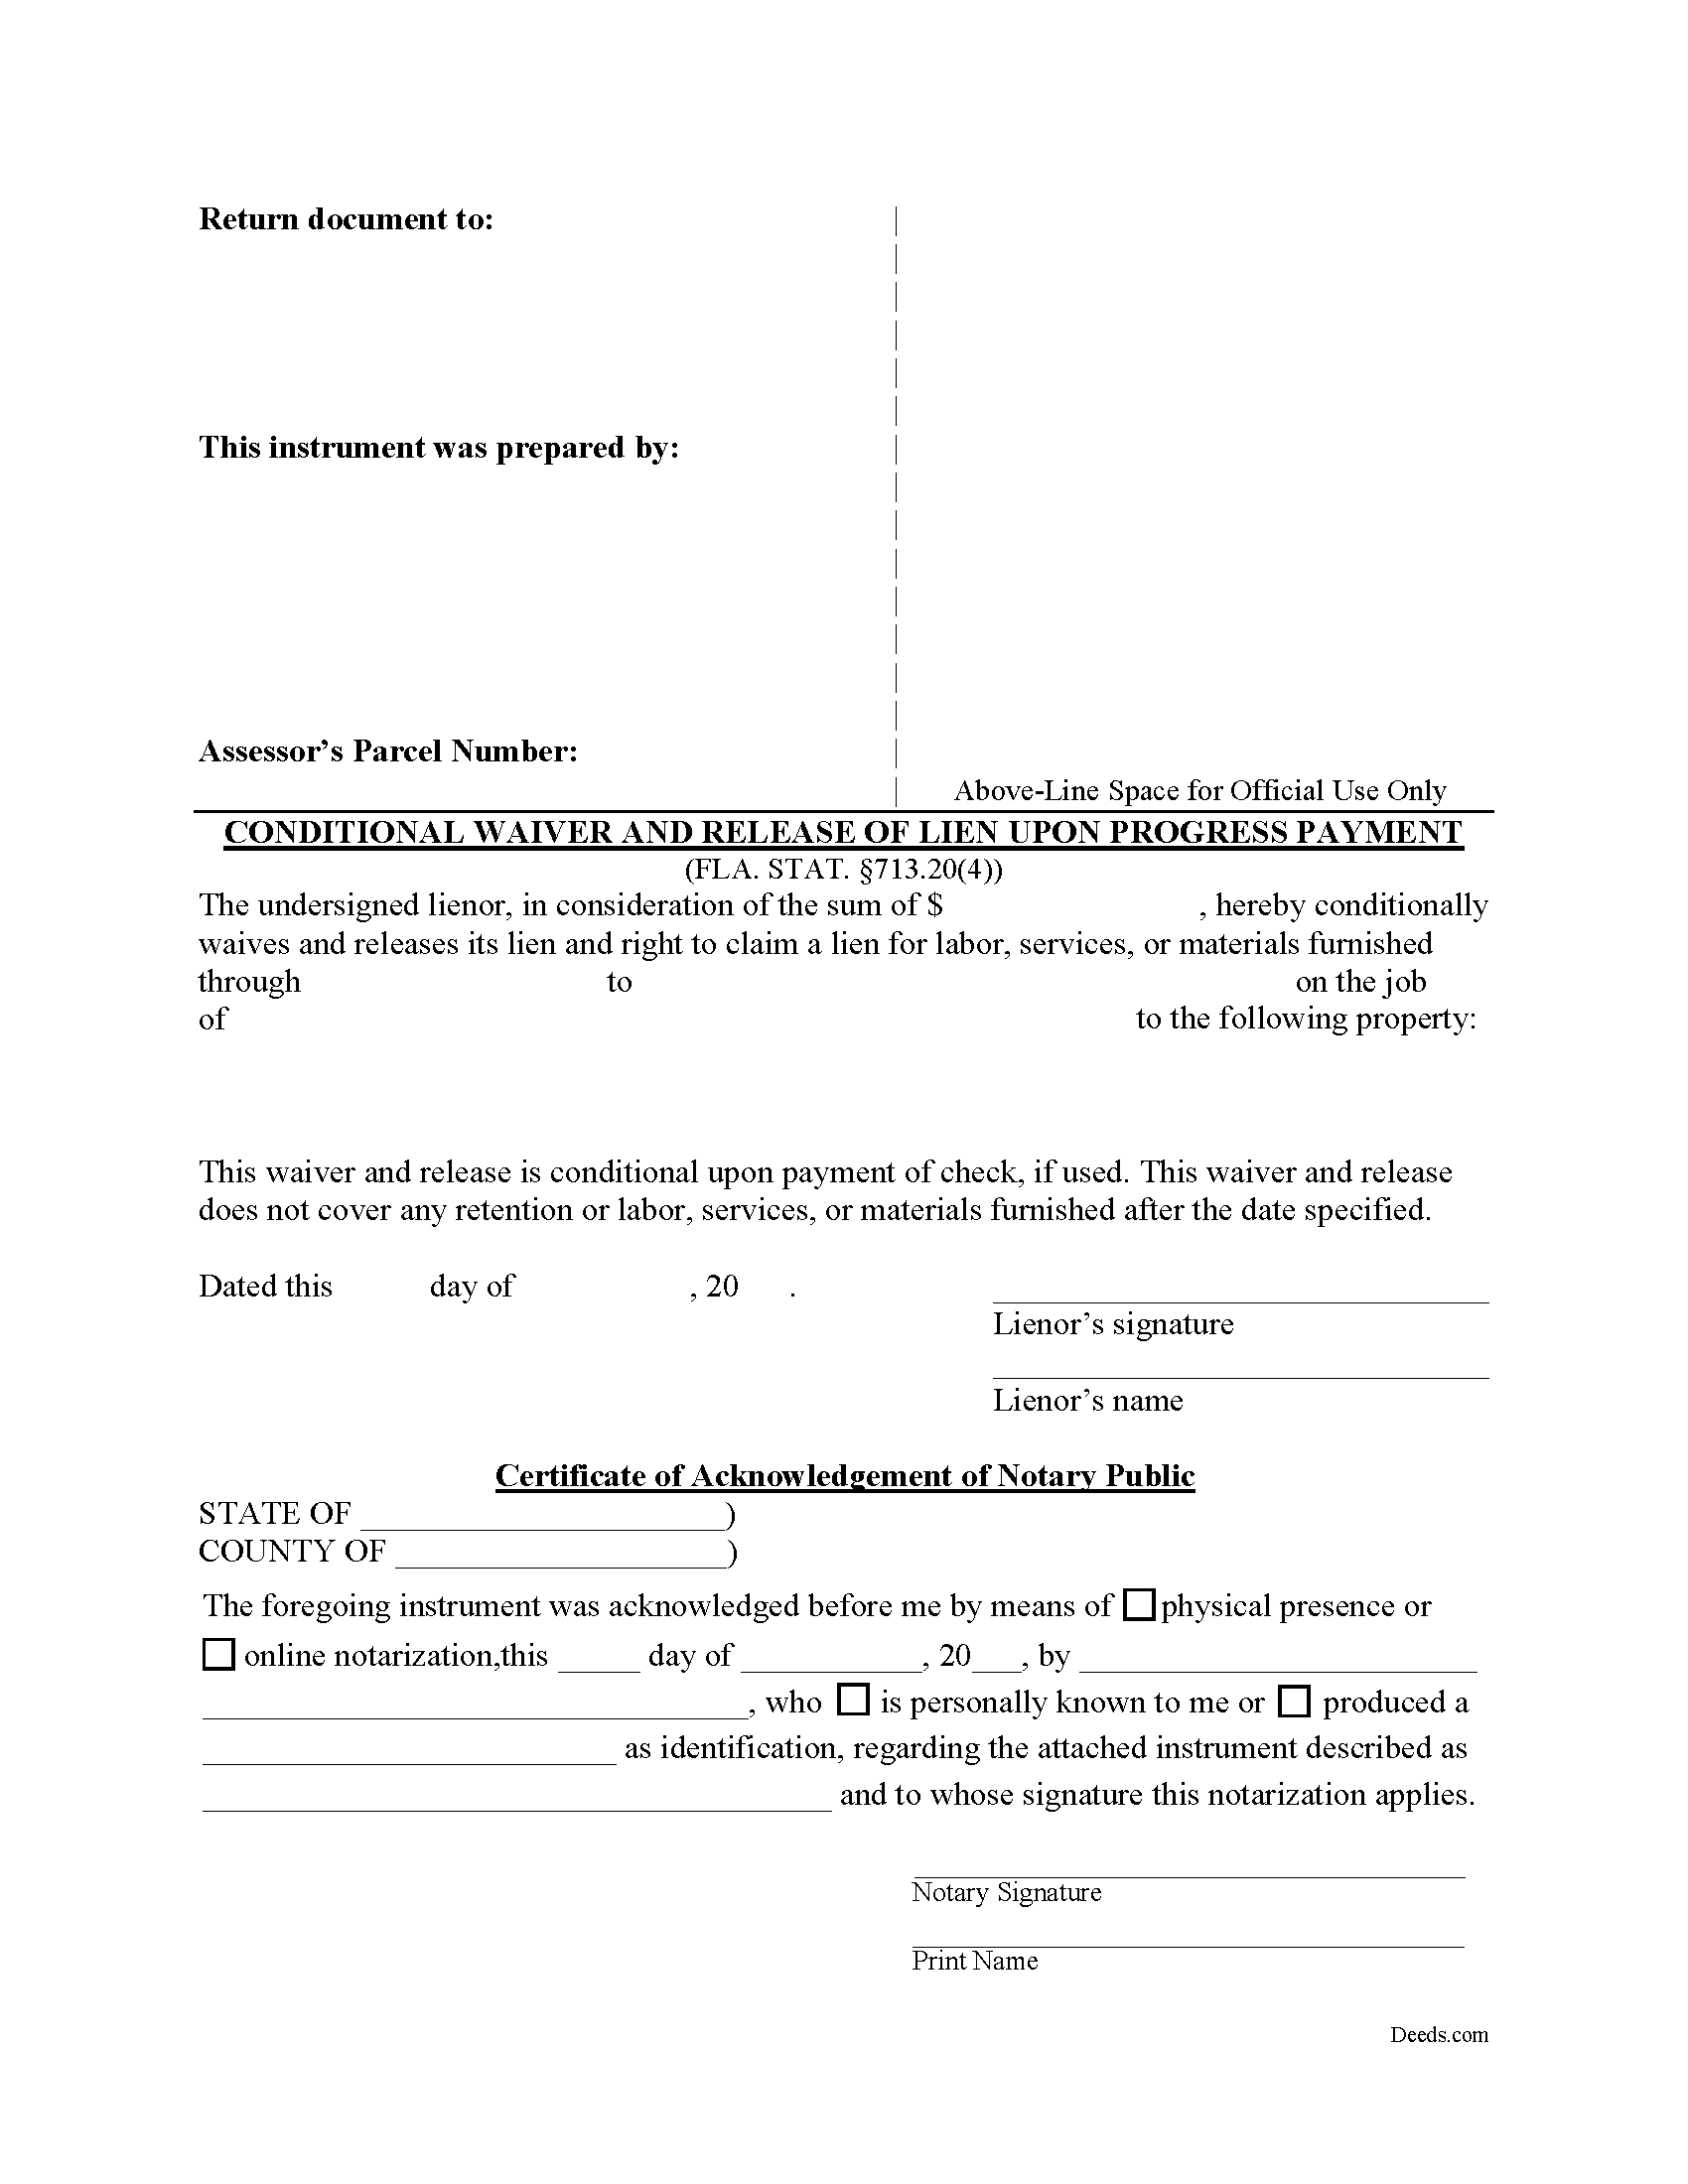 Conditional Waiver and Release of Lien upon Progress Payment Form